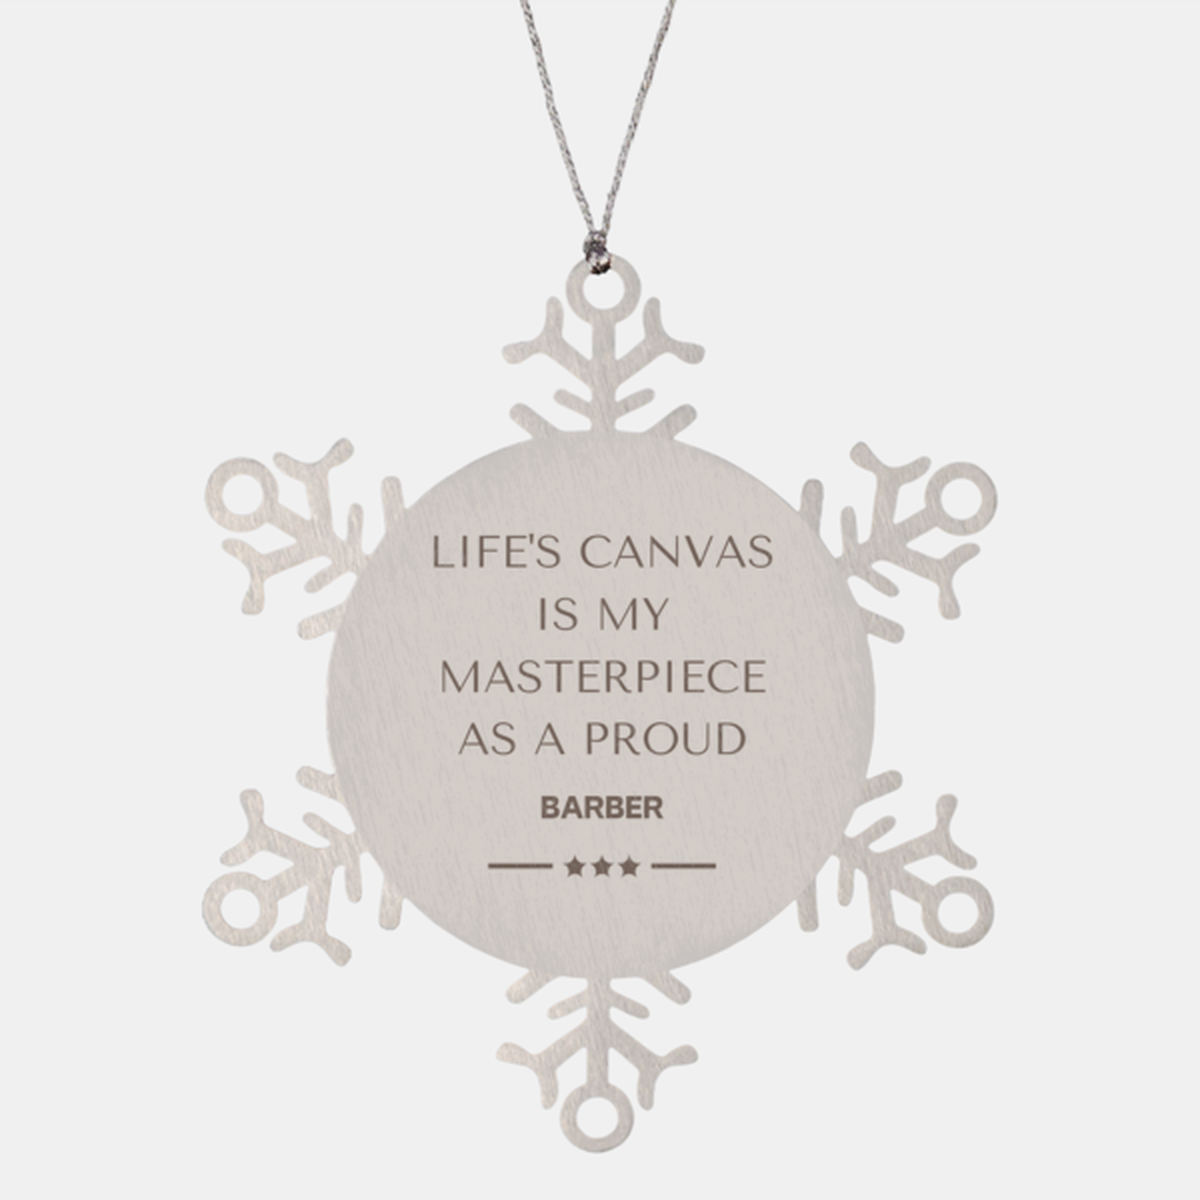 Proud Barber Gifts, Life's canvas is my masterpiece, Epic Birthday Christmas Unique Snowflake Ornament For Barber, Coworkers, Men, Women, Friends